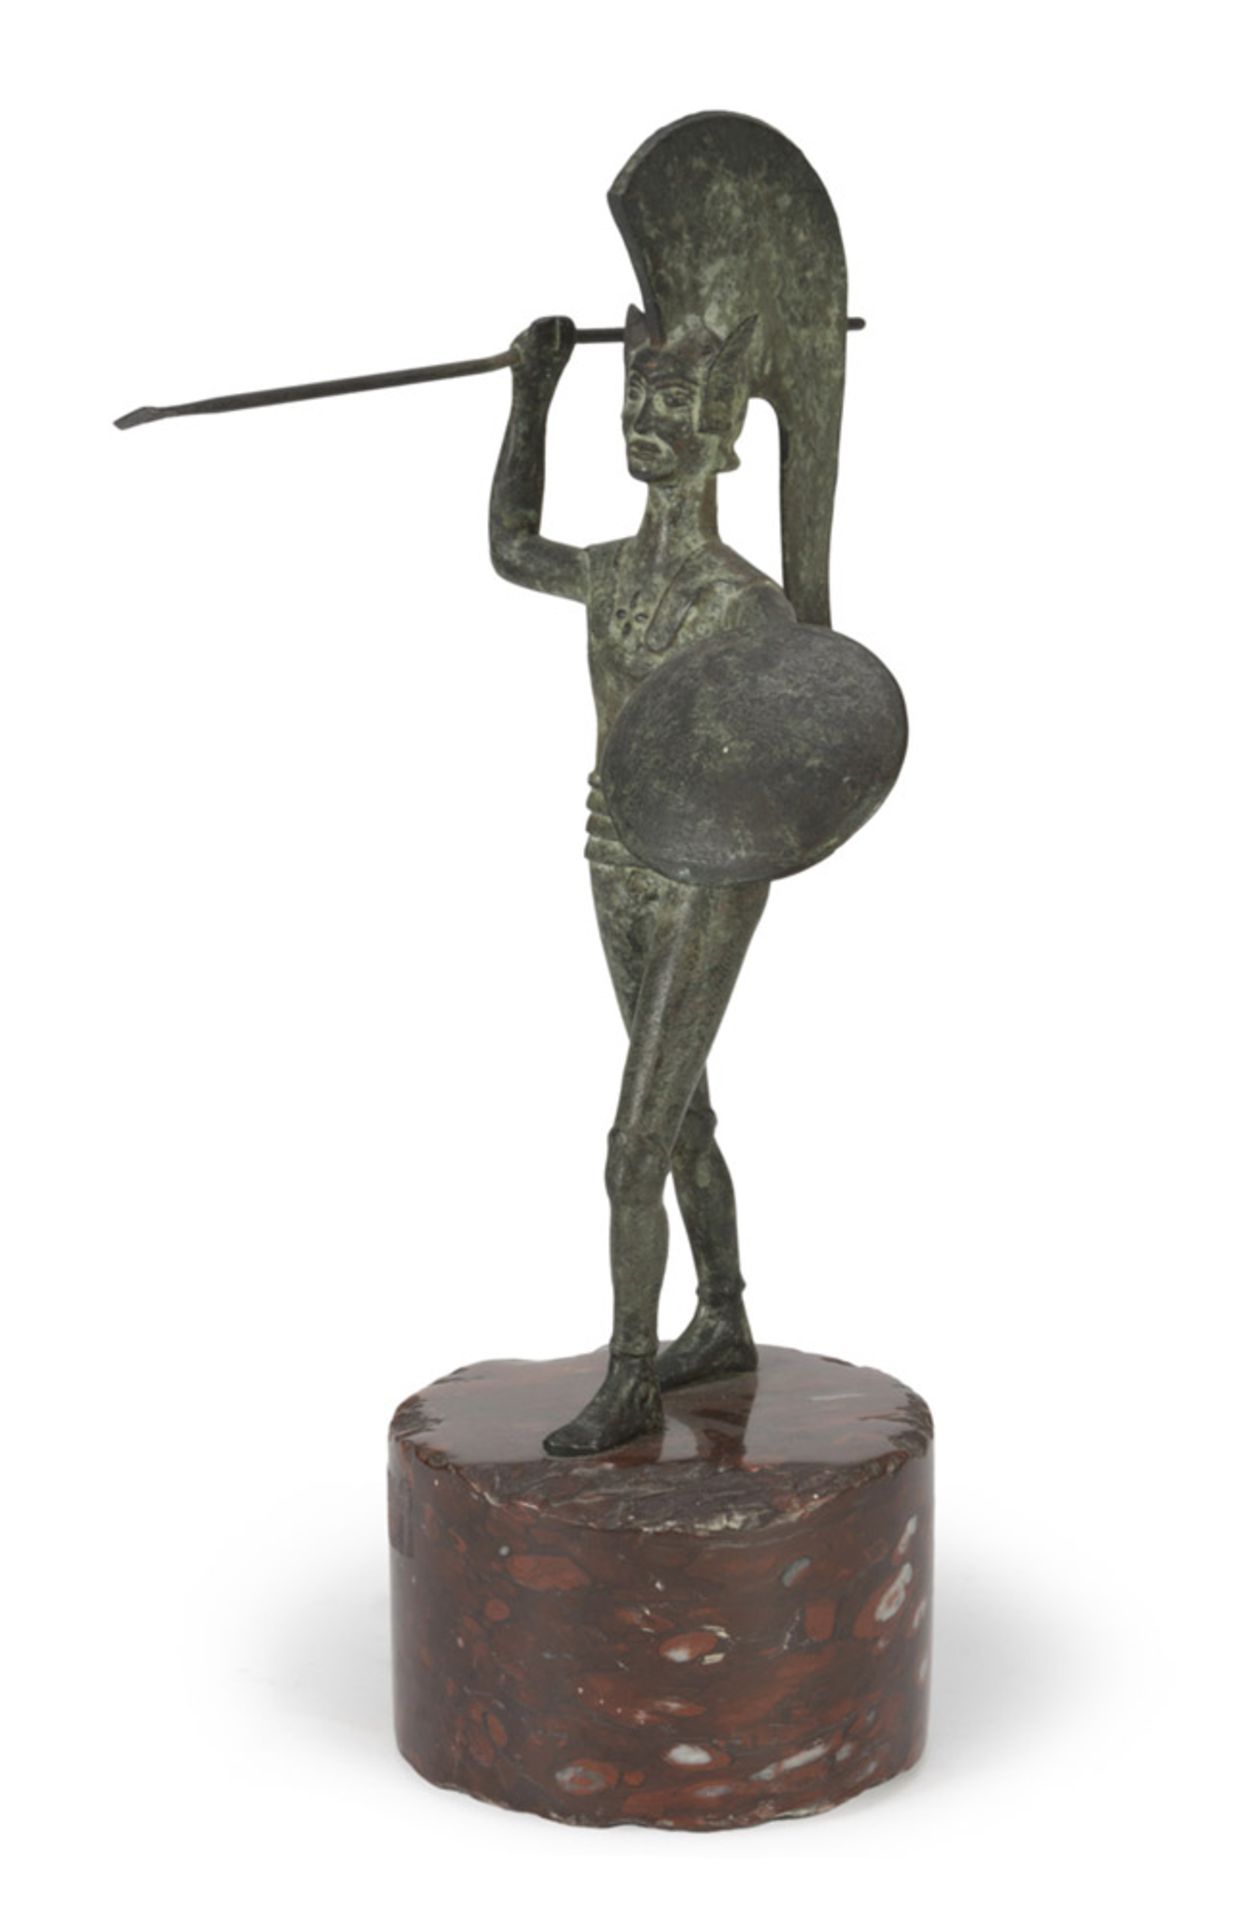 BRONZE SCULPTURE OF MINOIC WARRIOR, LATE 18TH, EARLY 19TH CENTURY